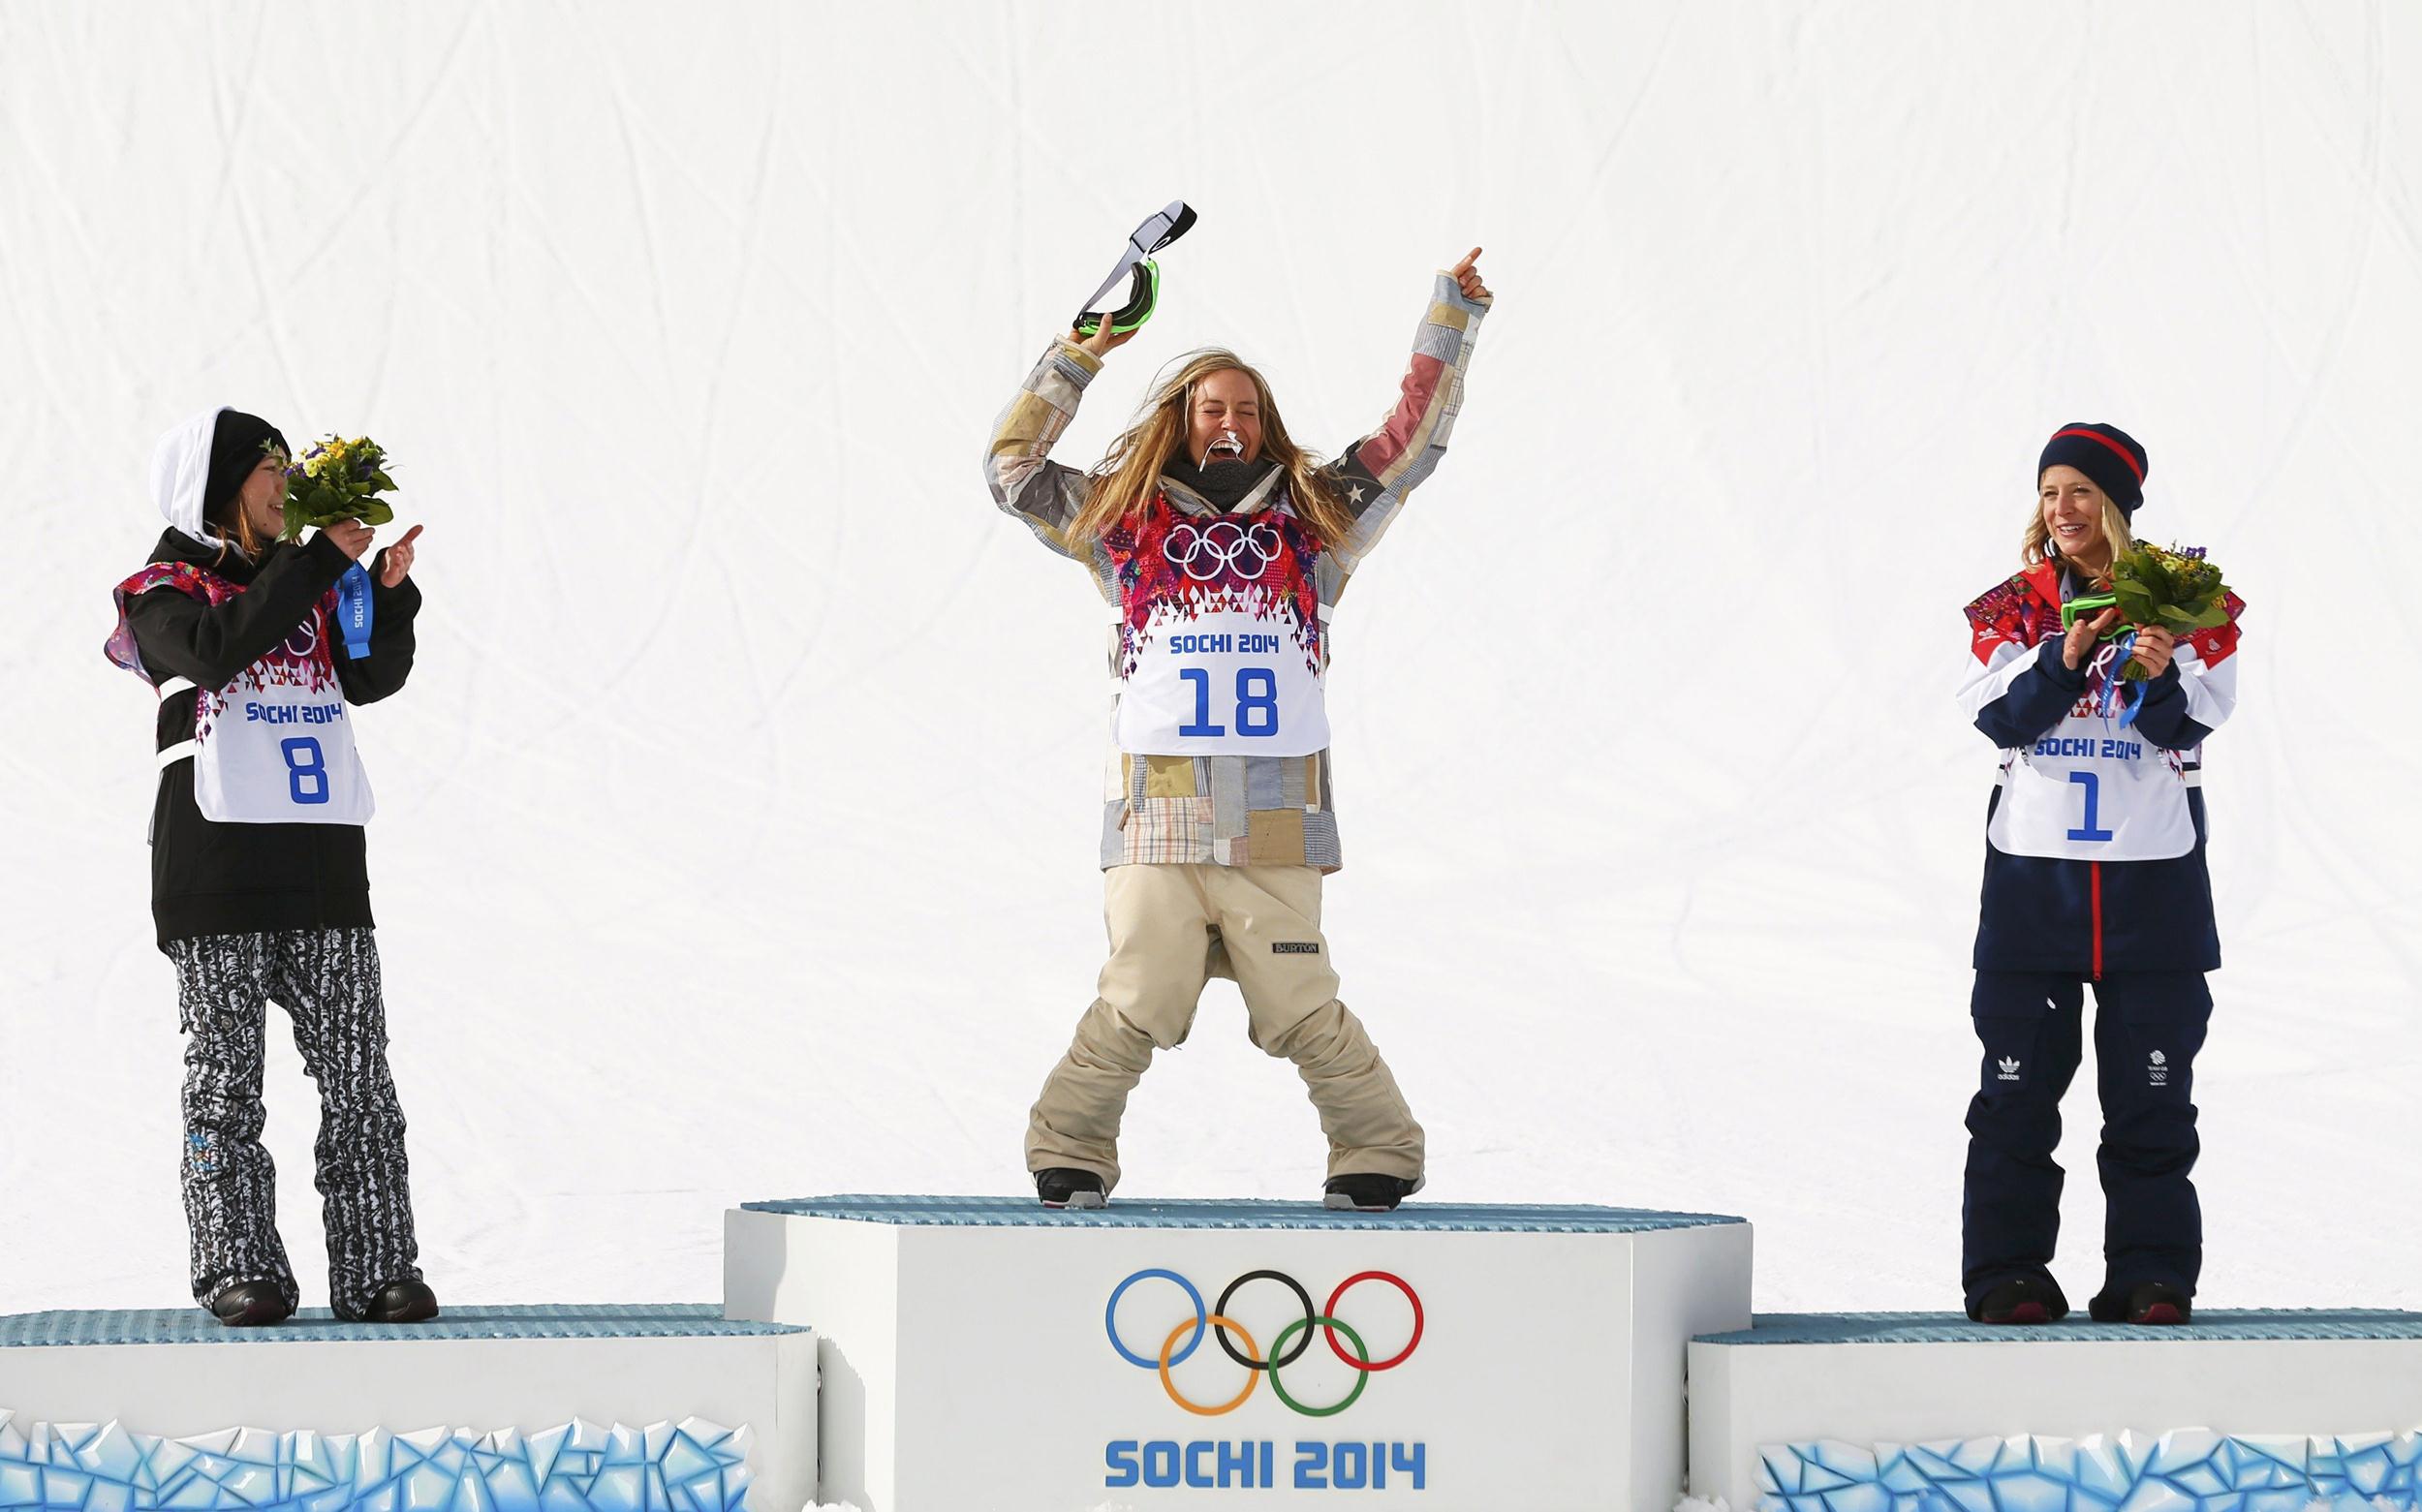 Medalists snowboard competitions at the Olympic Games in Sochi